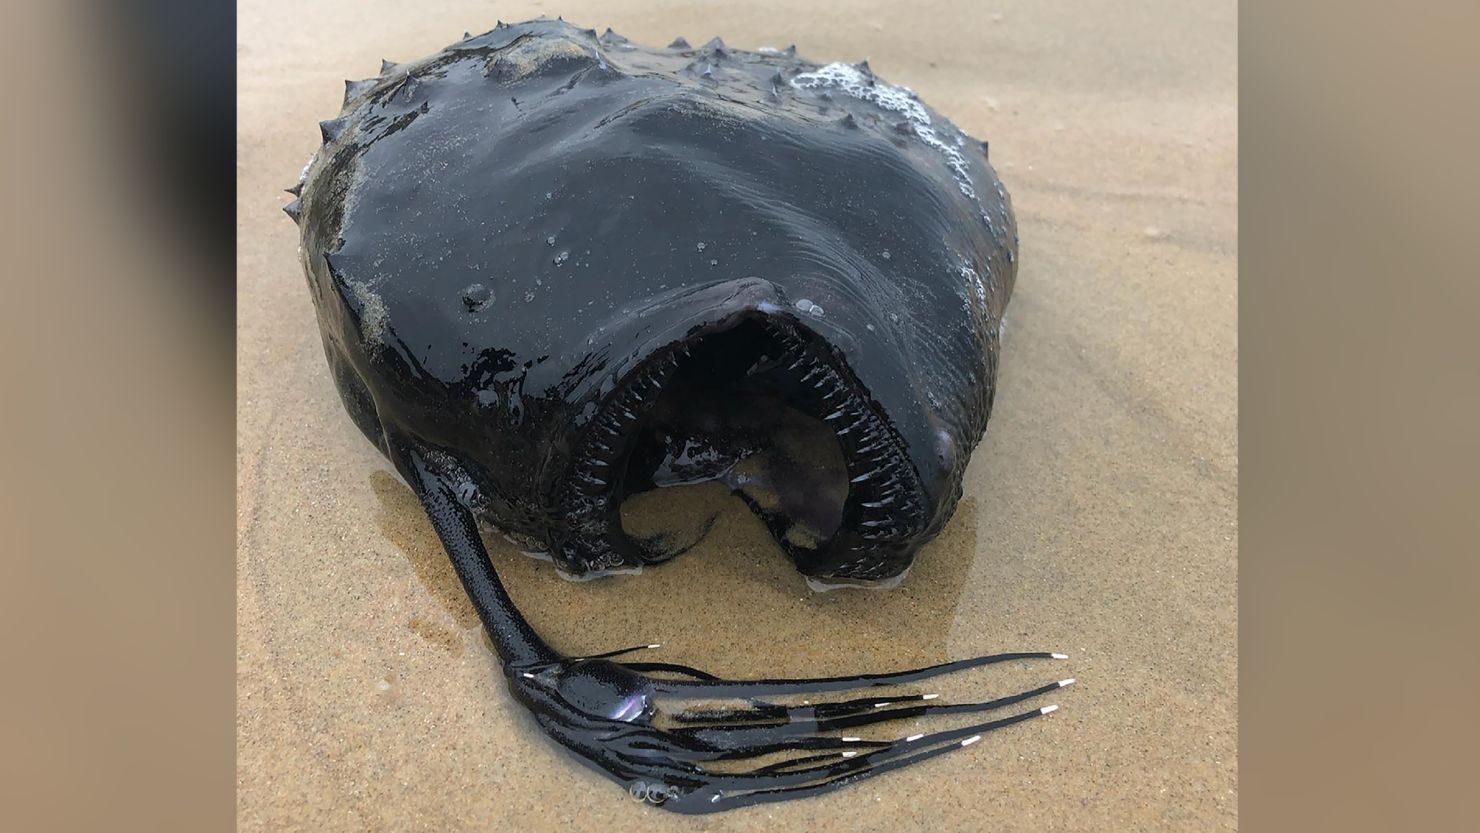 Football Fish: A monstrous-looking fish normally found thousands of feet  deep in the ocean washed up on a California beach